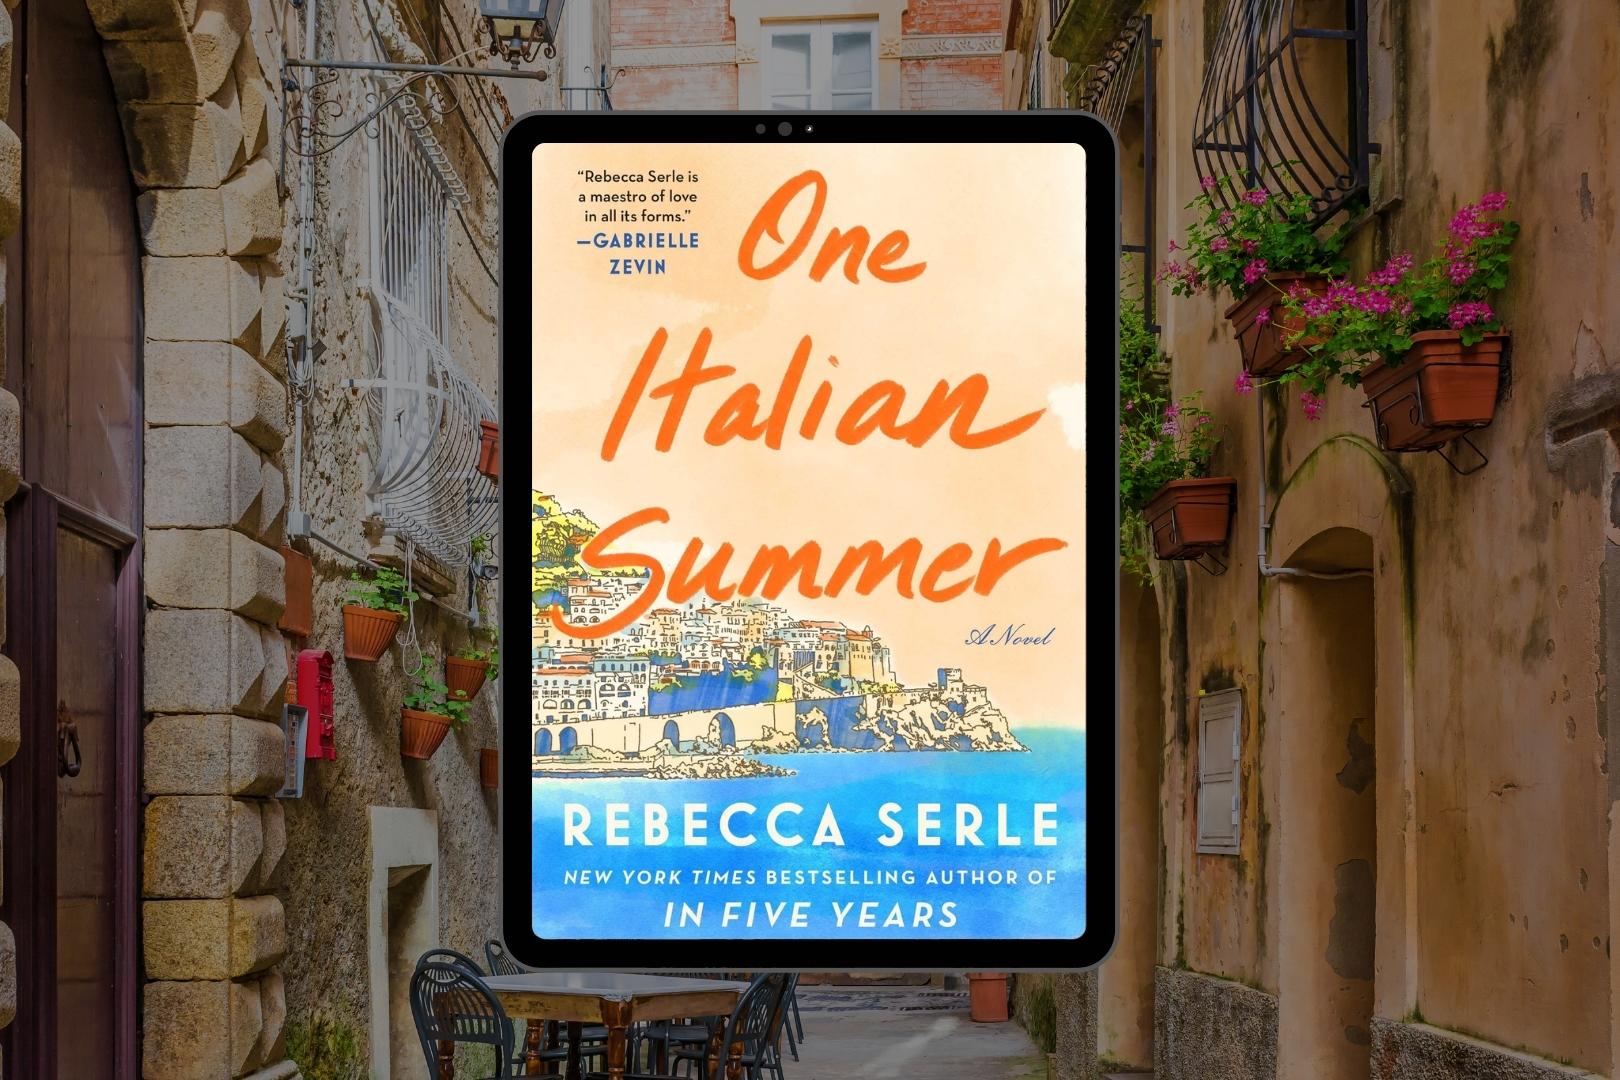 Review: One Italian Summer by Rebecca Serle